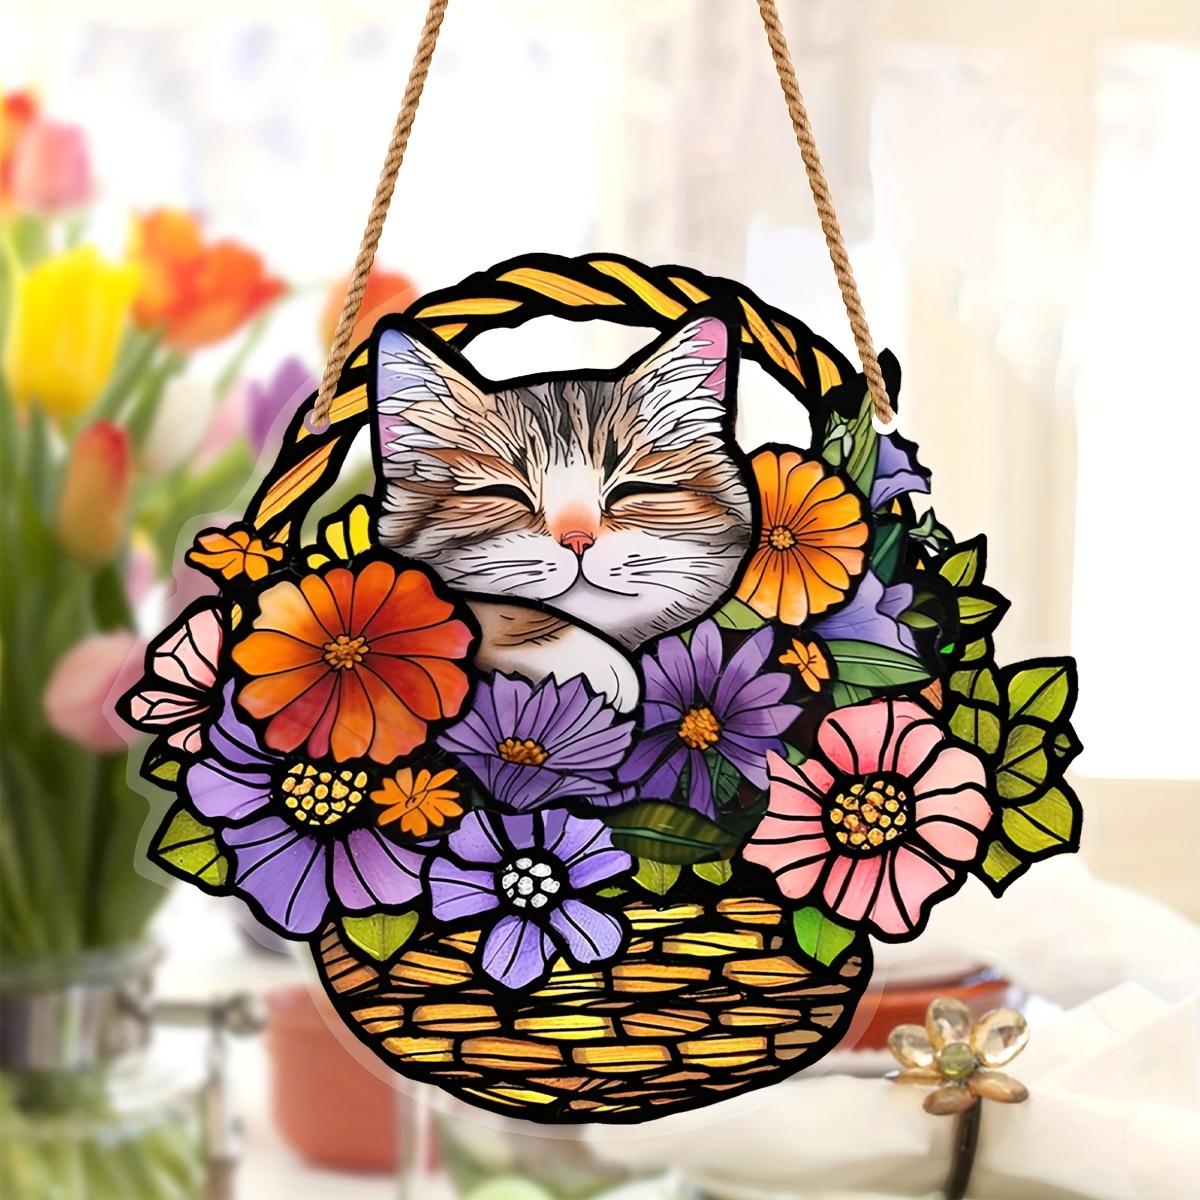 

Acrylic Cat Stained Window Hanging Suncatcher With Flower Design, Indoor Outdoor Hanging Home Garden Decor, No Electricity Or Feathers Required, Perfect Gift For Cat Lovers